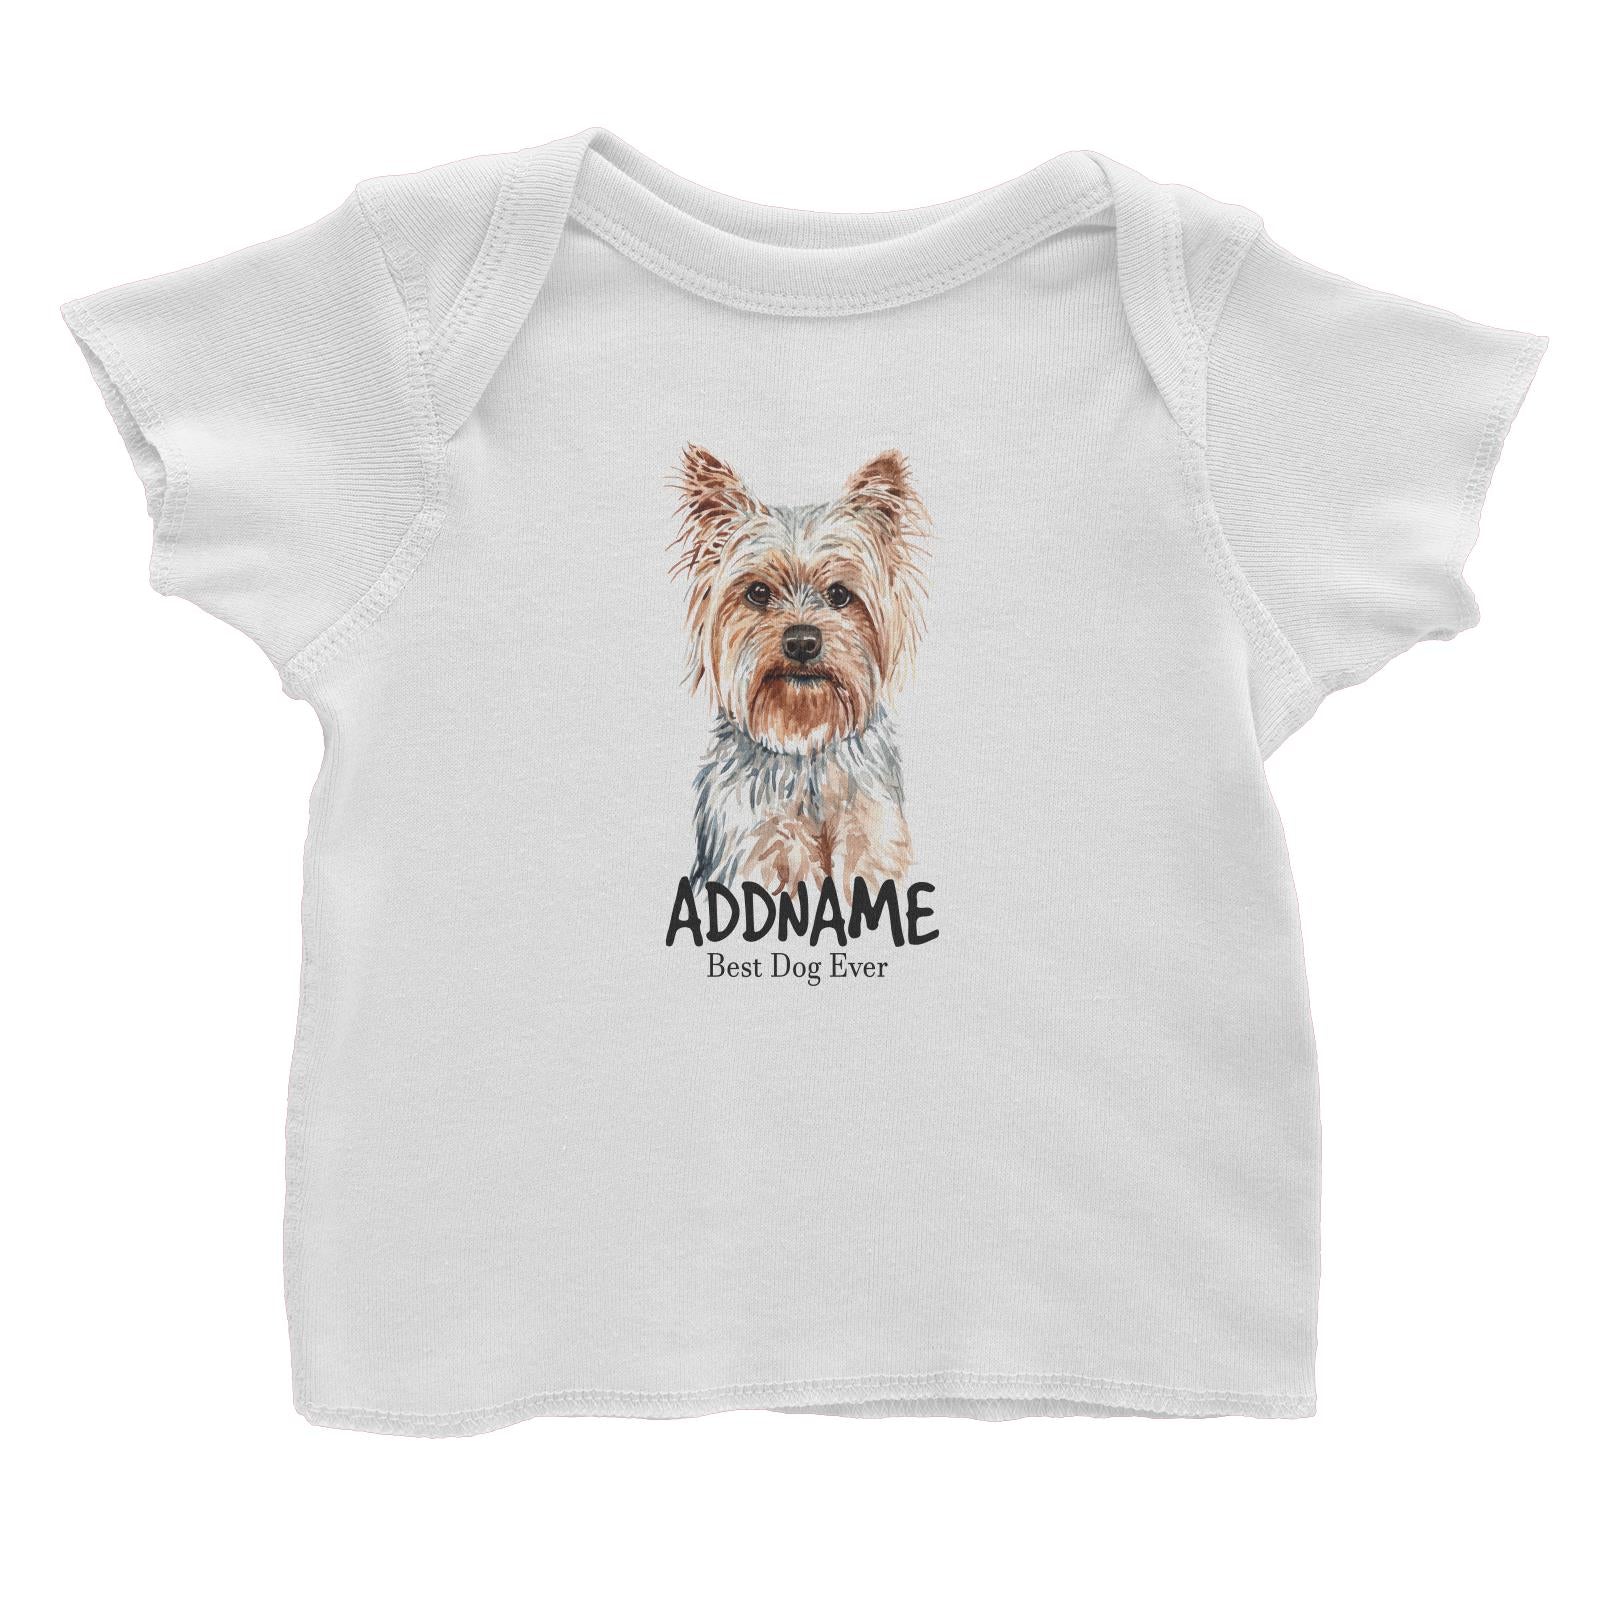 Watercolor Dog Yorkshire Terrier Best Dog Ever Addname Baby T-Shirt